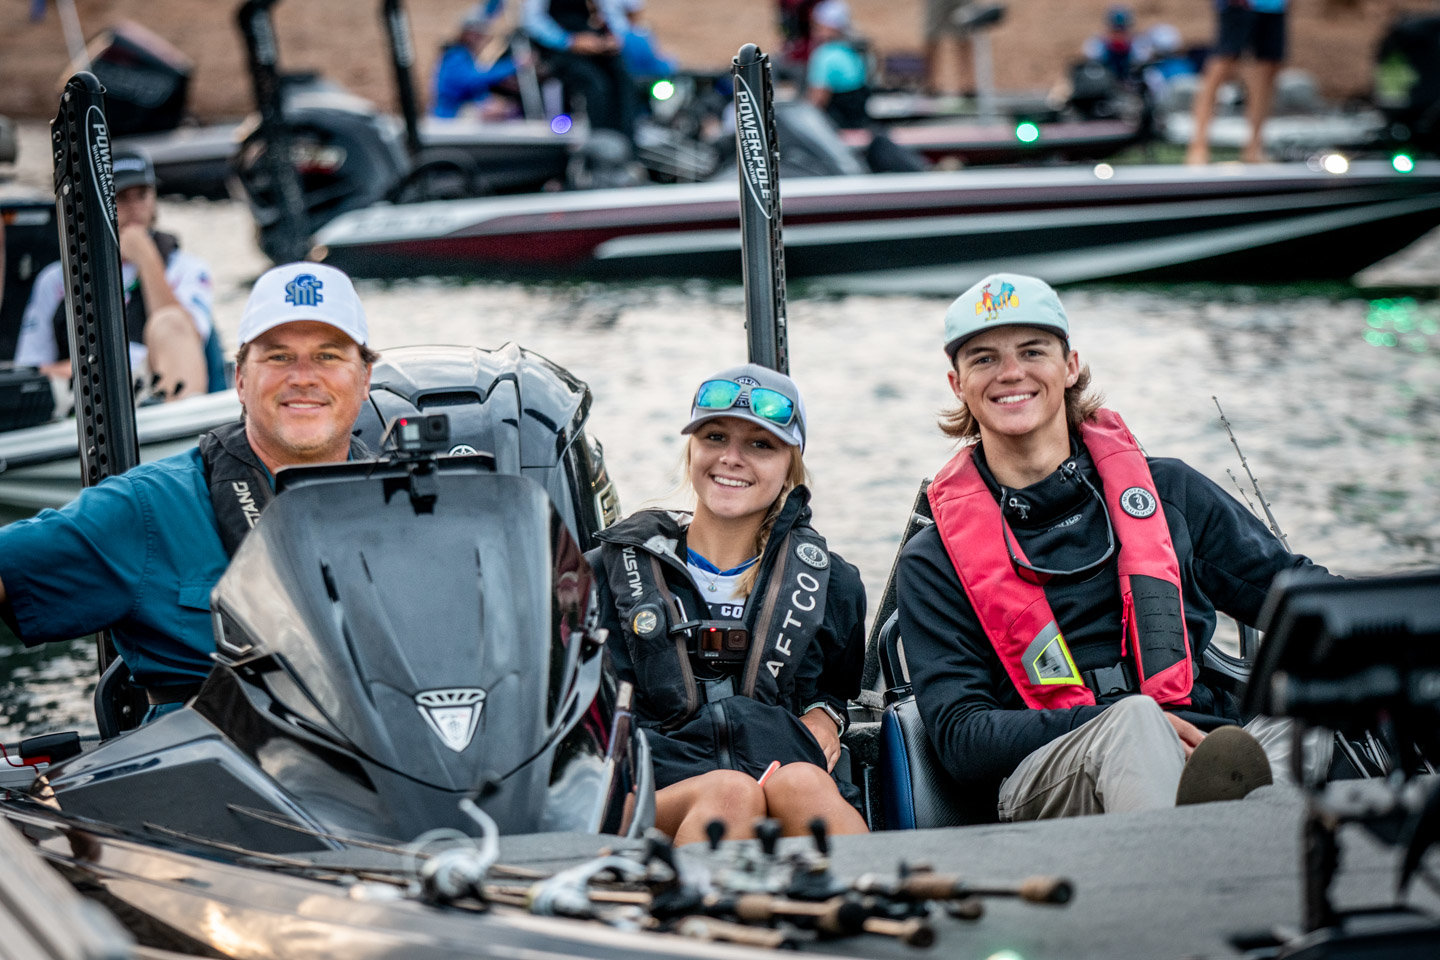 Bassmaster Elite Series pro Scott Martin is serving as boat captain at the 2022 Abu Garcia Bassmaster High School National Championship presented by Academy Sports + Outdoors on Lake Hartwell.